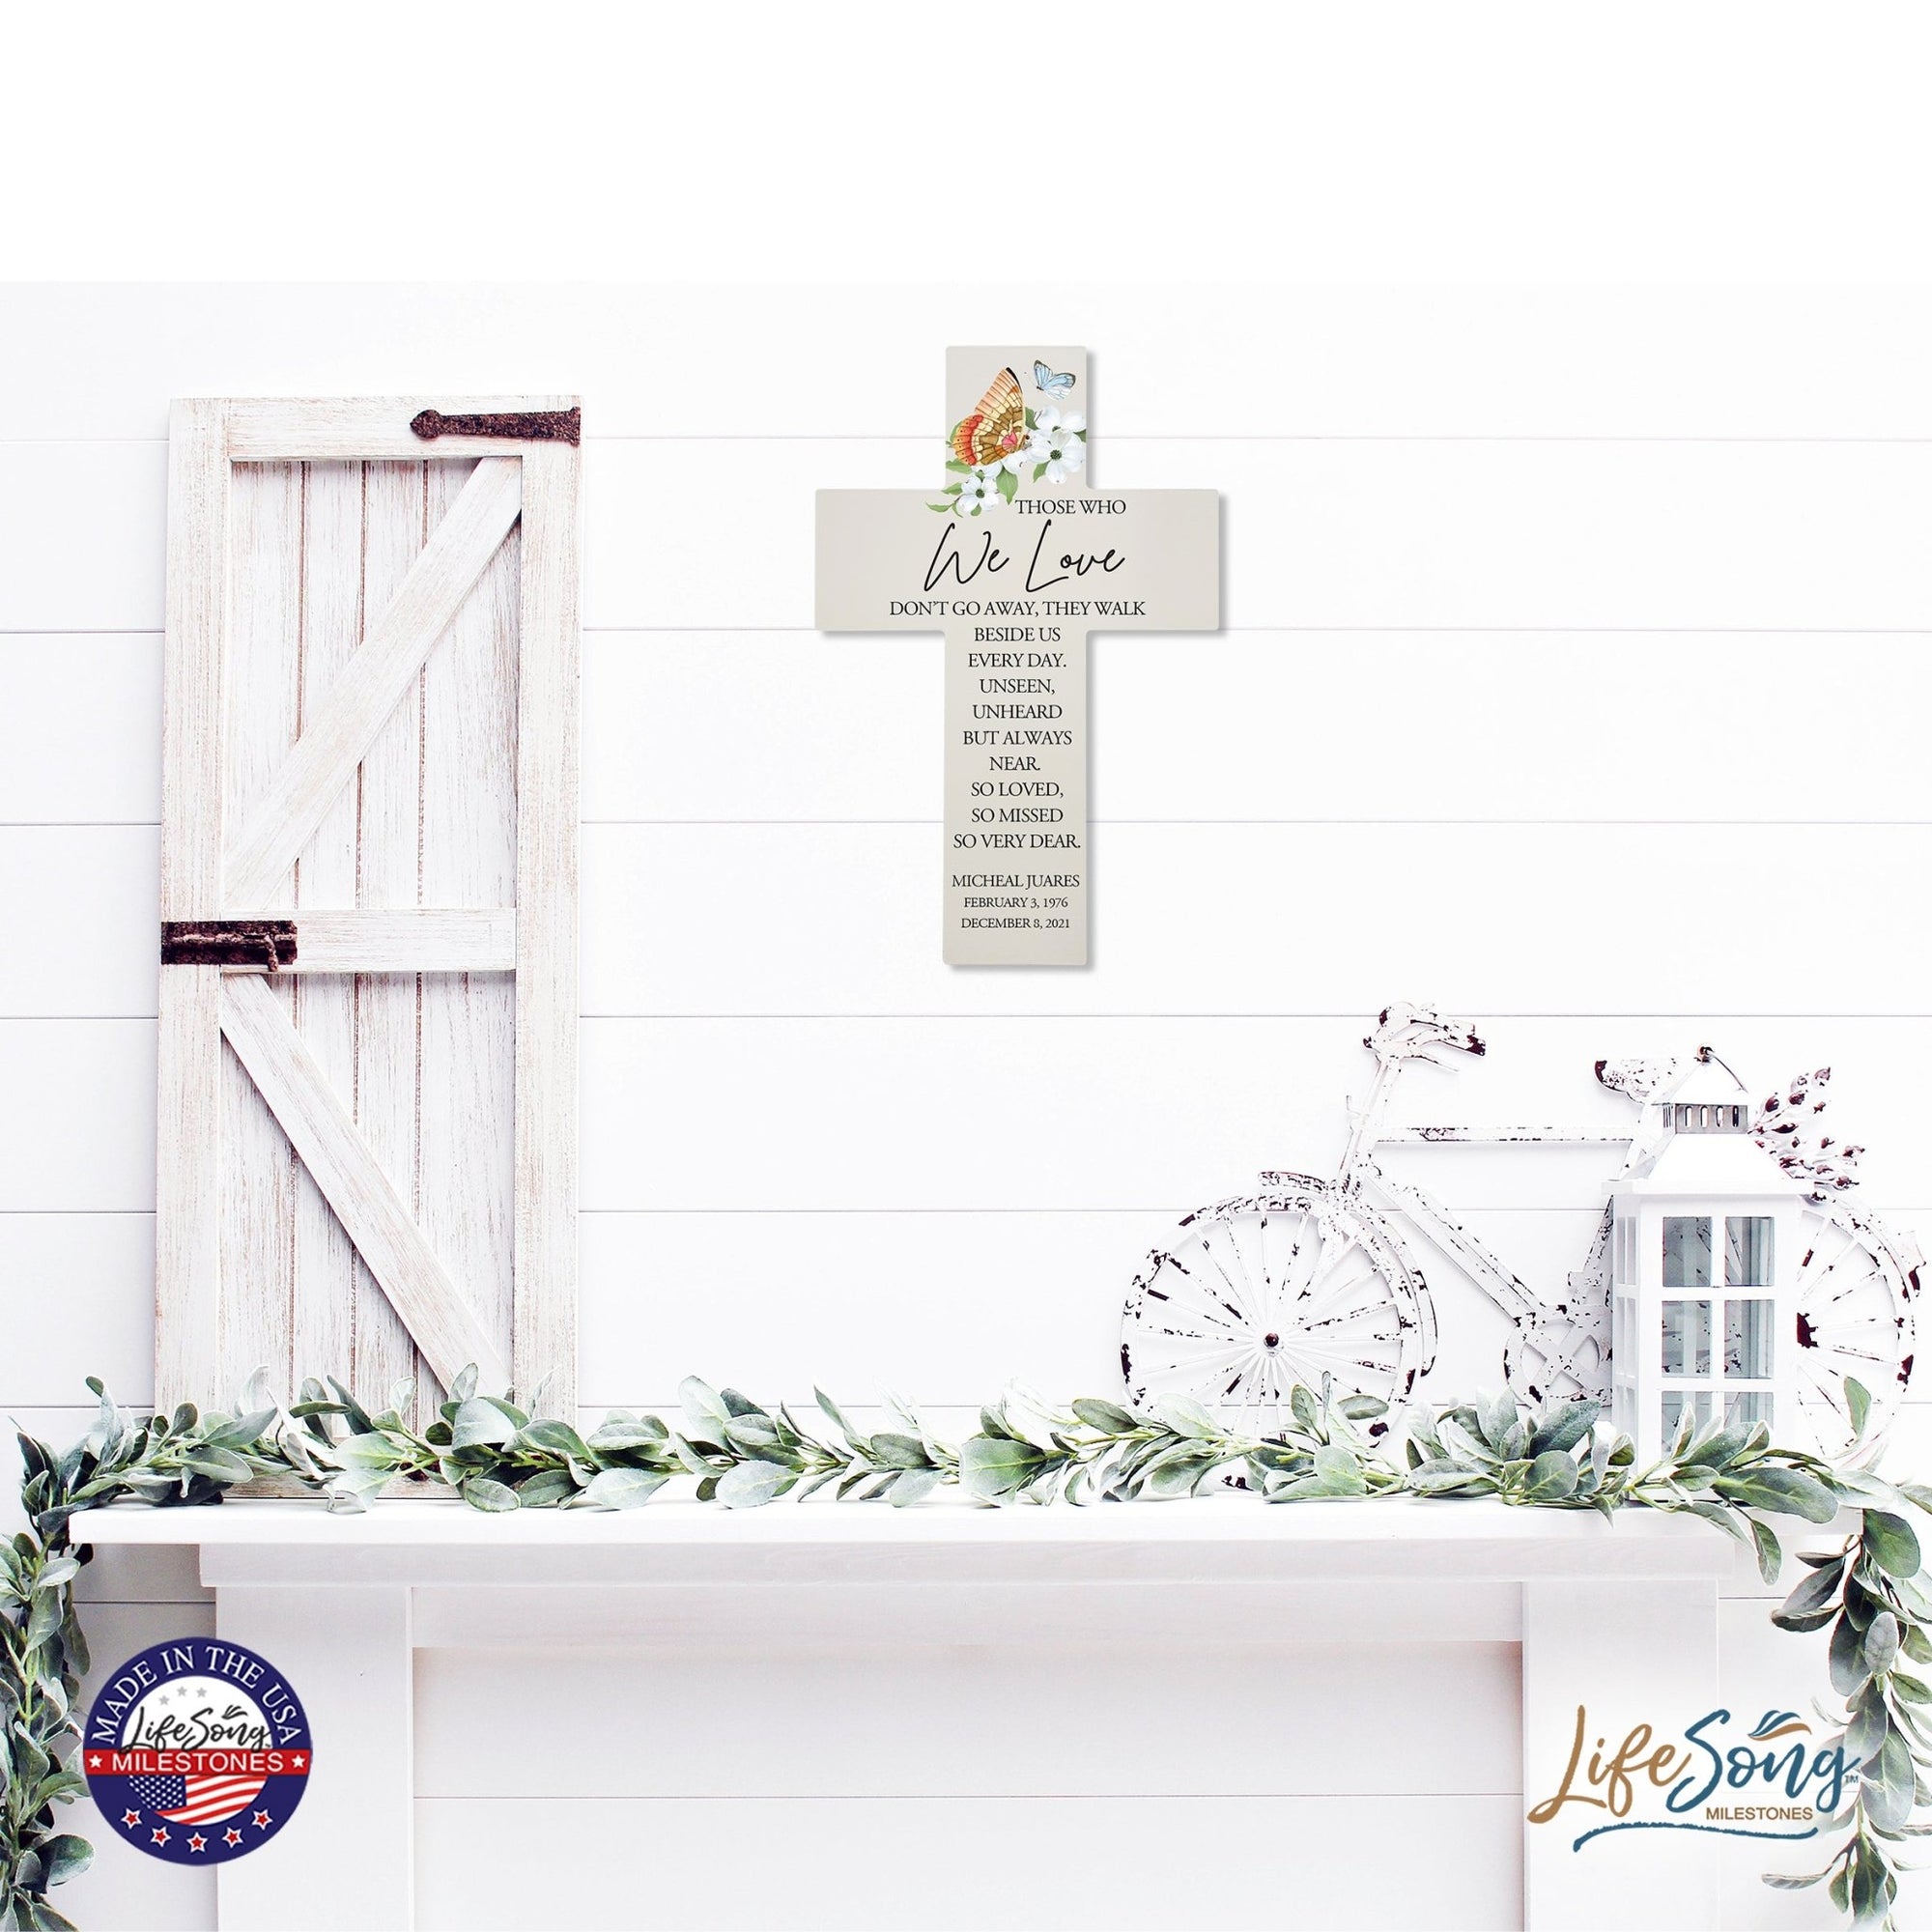 Personalized Butterfly Memorial Bereavement Wall Cross For Loss of Loved One Those Who We Love (Butterfly) Quote 14 x 9.25 Those Who We Love Don't Go Away, They Walk Beside Us Everyday - LifeSong Milestones